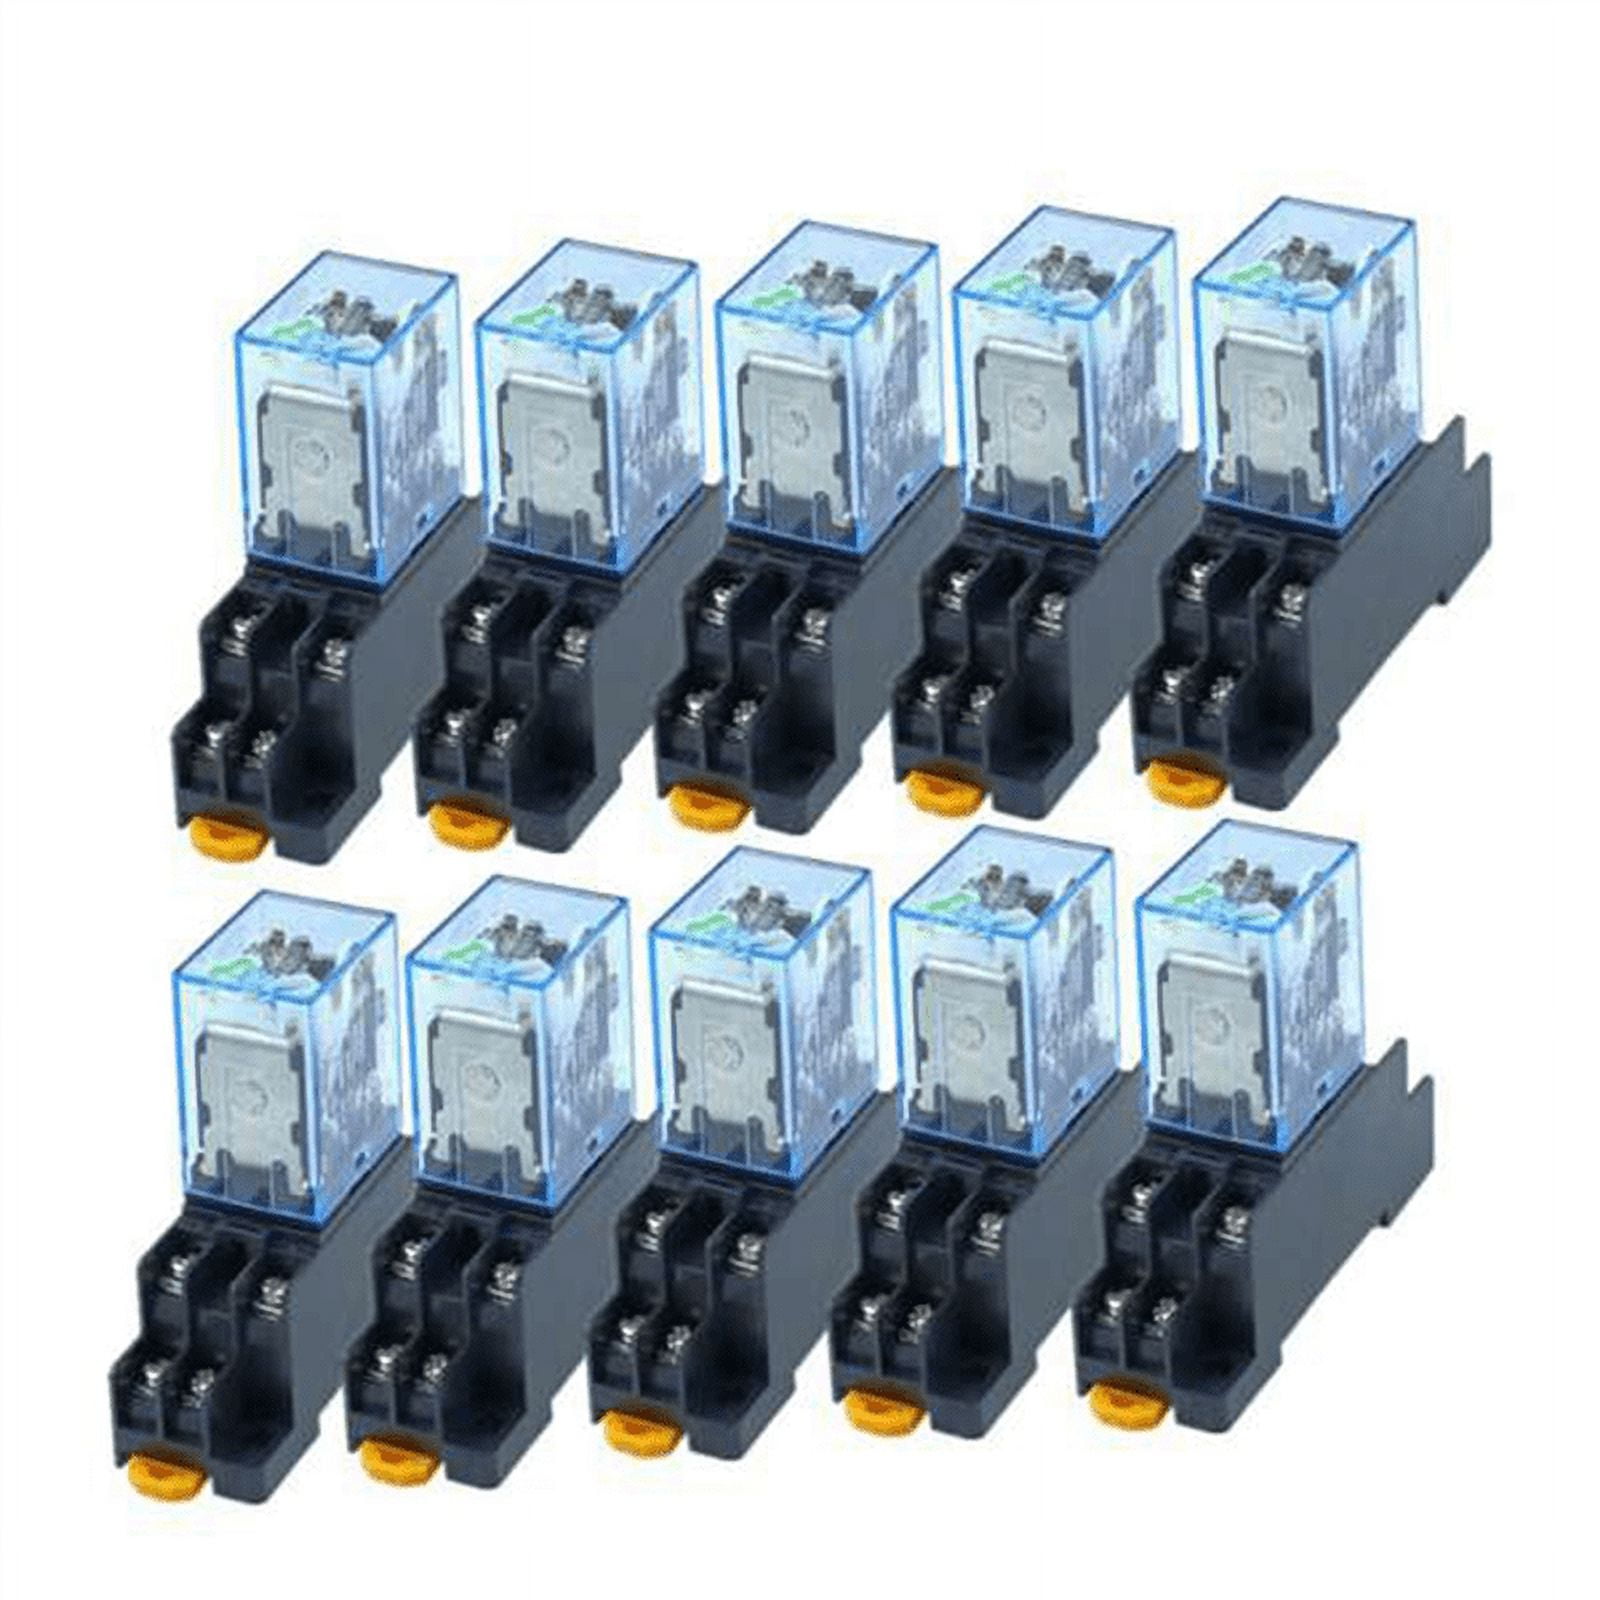 10pc My4nj 14pin 4dpdt Electronic Mini Electromagnetic Relay 5a Coil